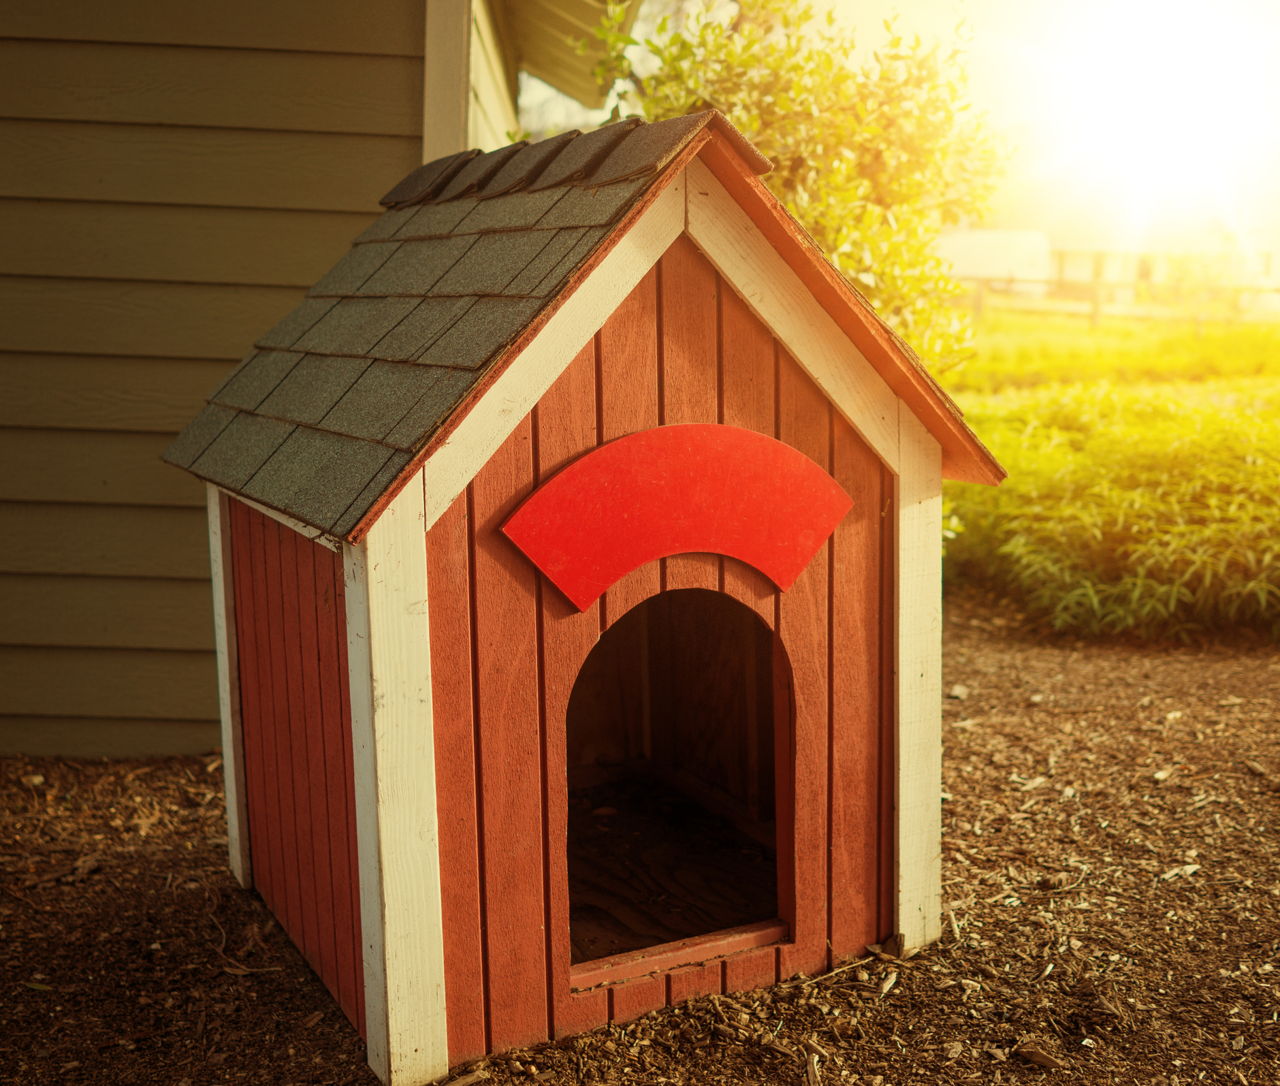 A Visual Guide on How to Build a Dog House in 8 Simple Steps